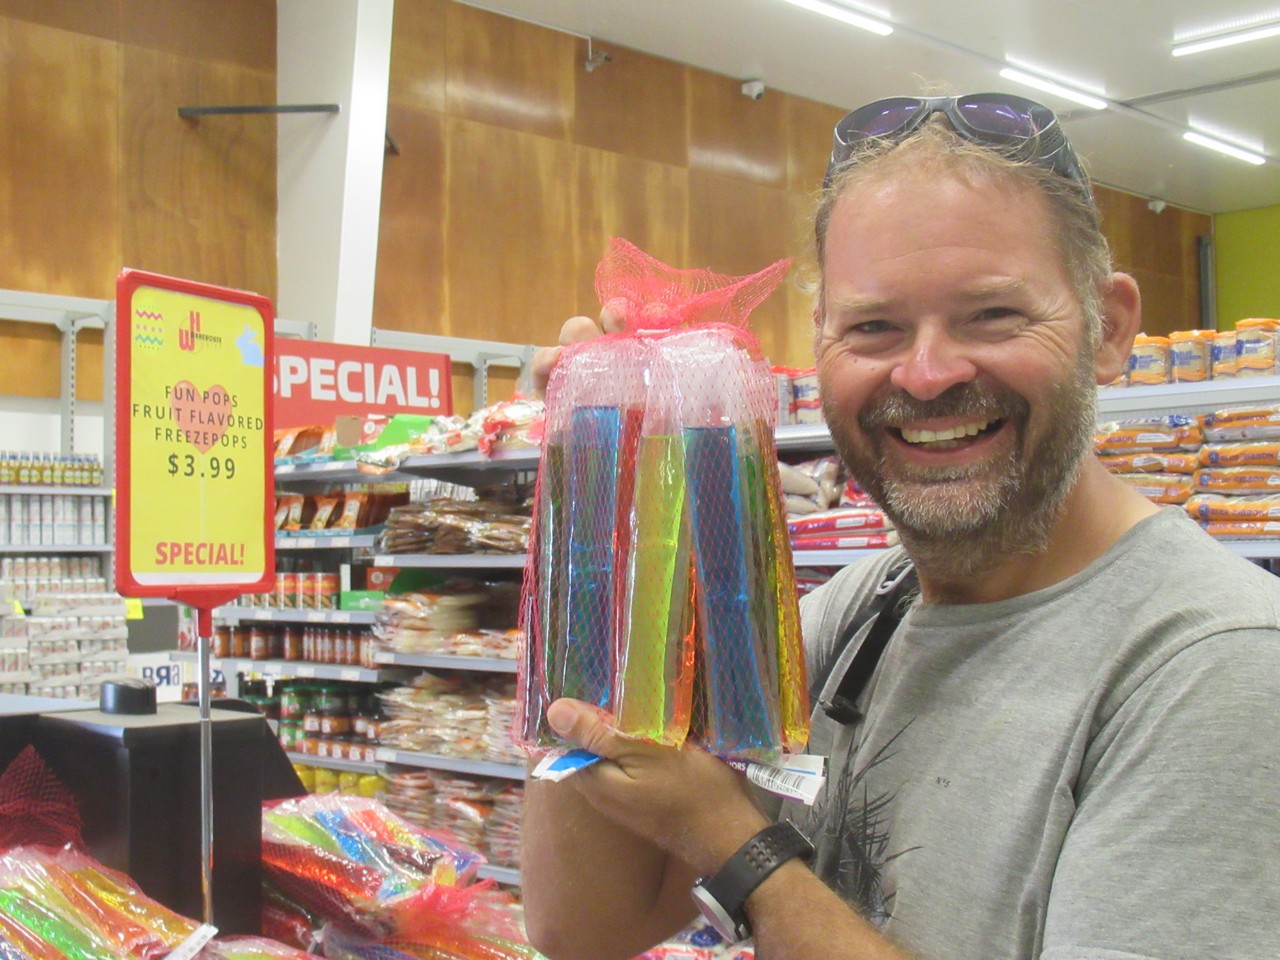 Iain is in his element finding ‘ice pops’.